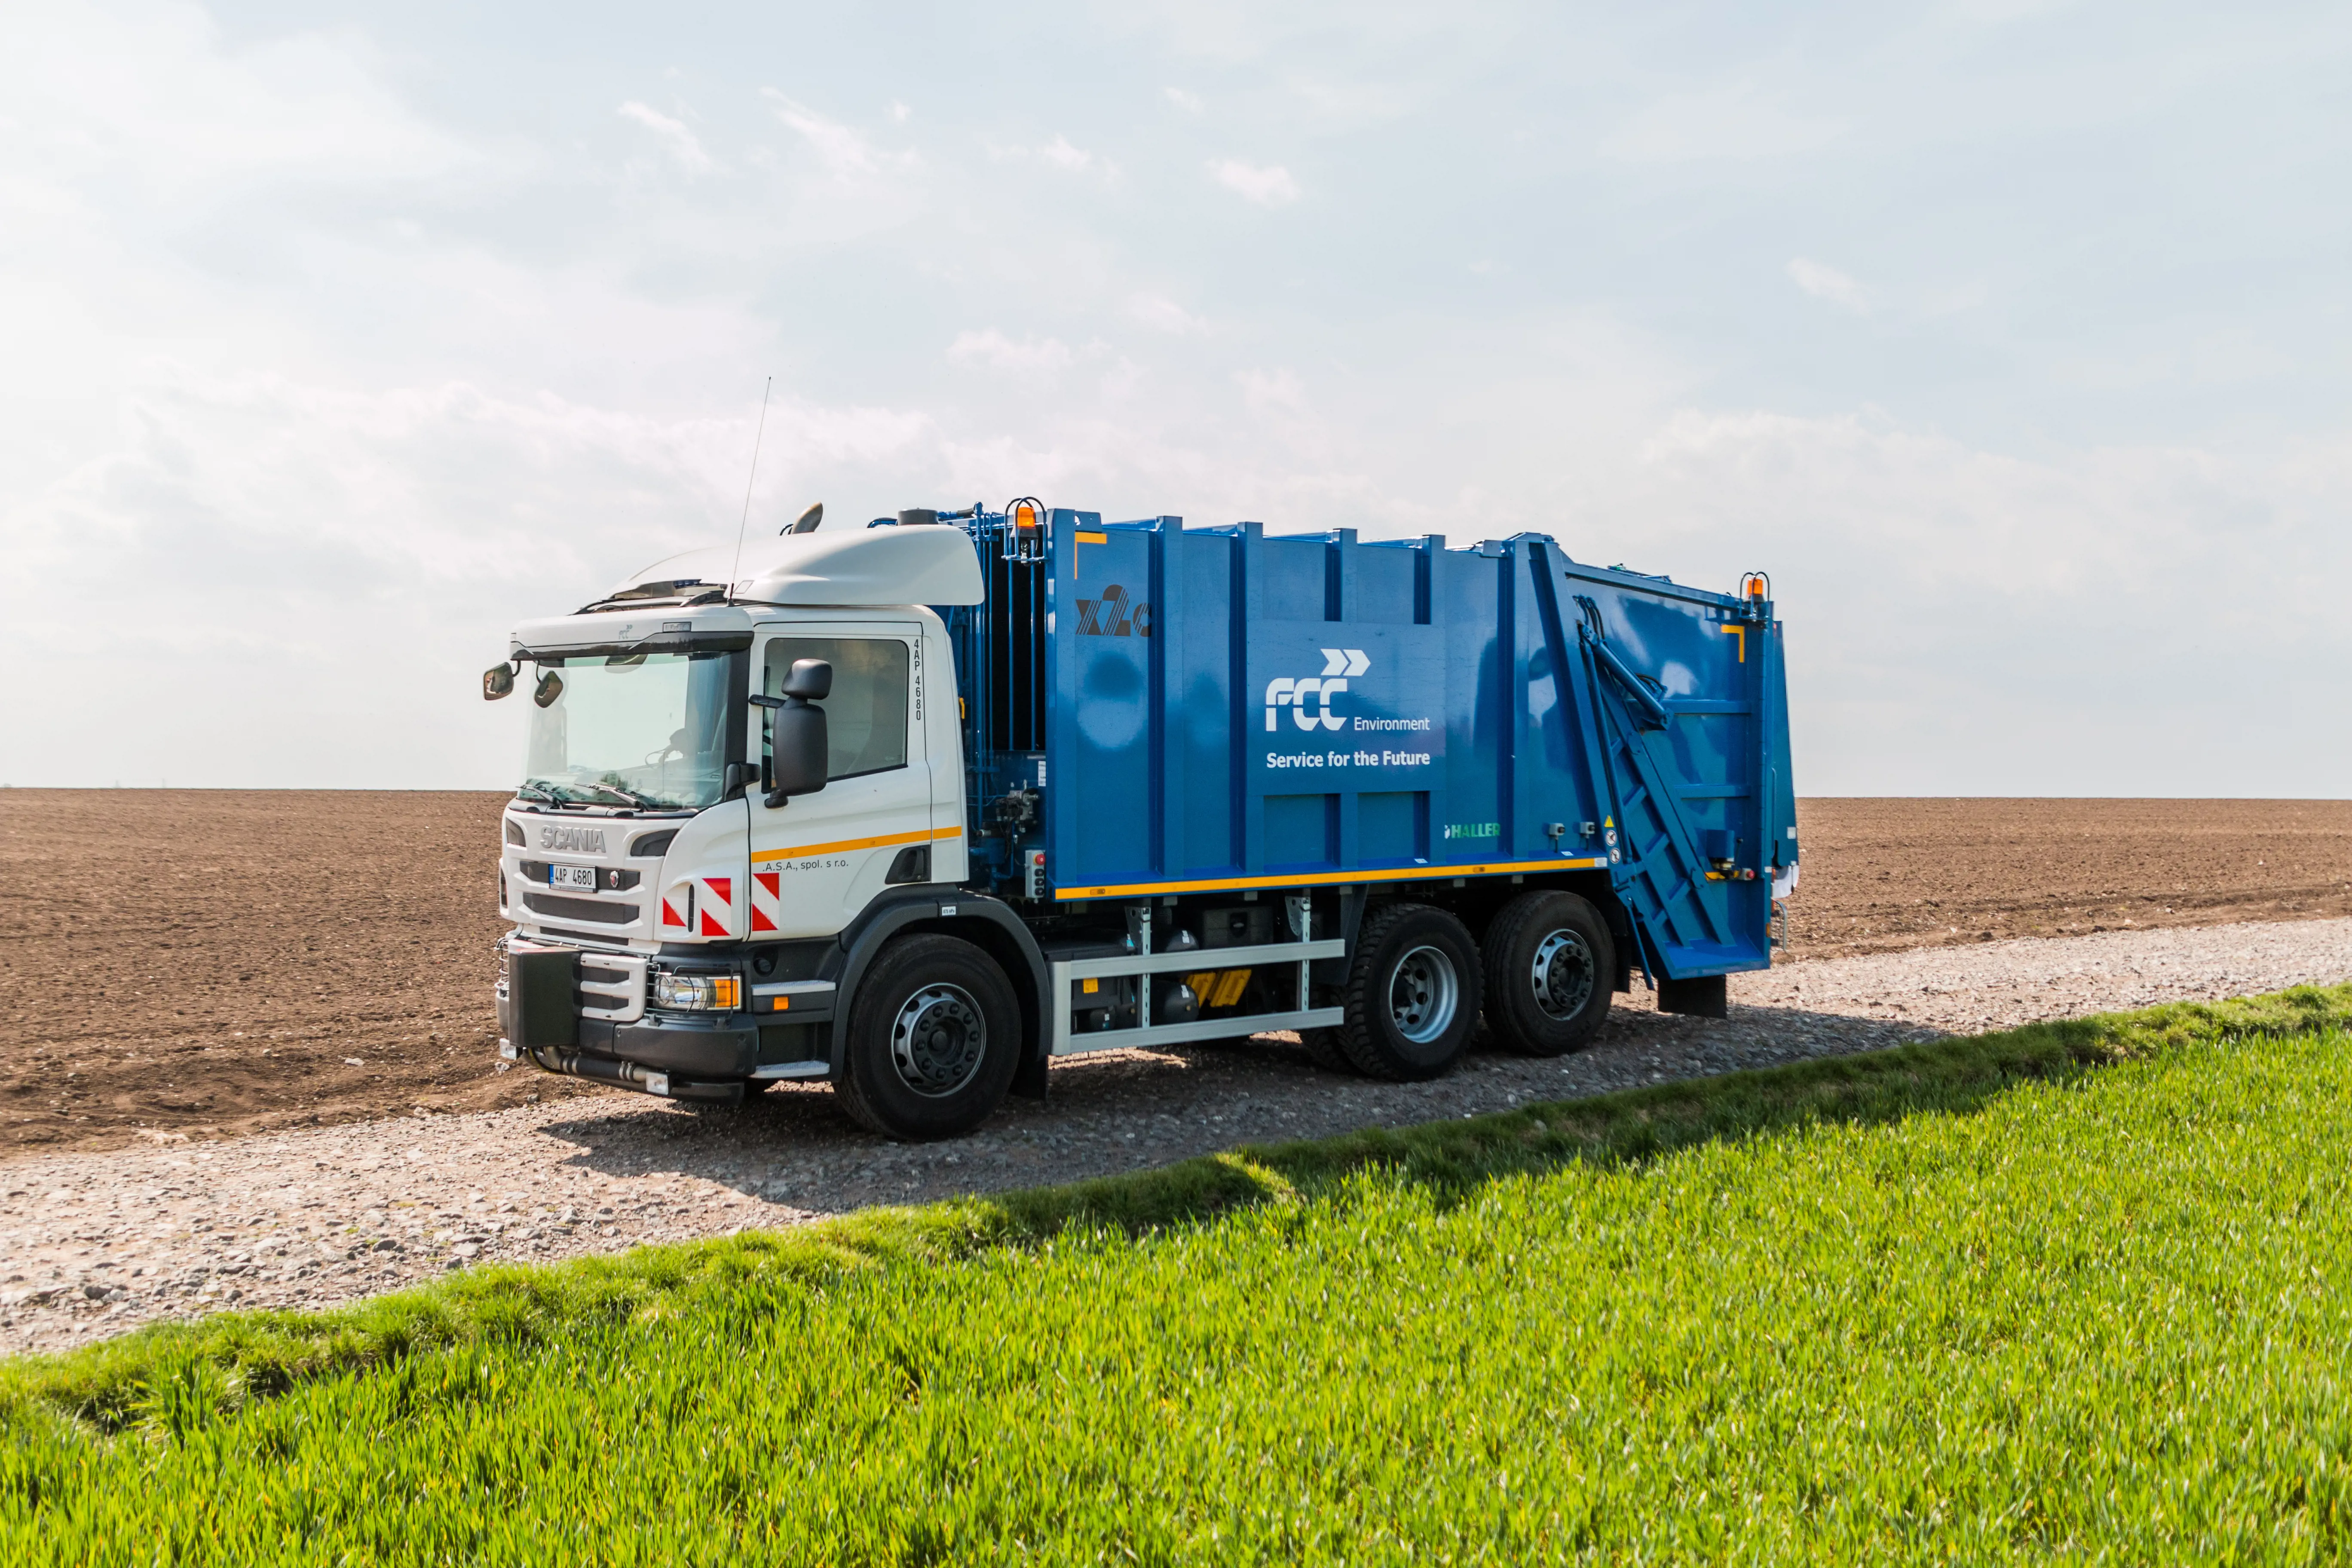 Collection, transport and disposal of municipal waste
Collection, transport and disposal of municipal waste